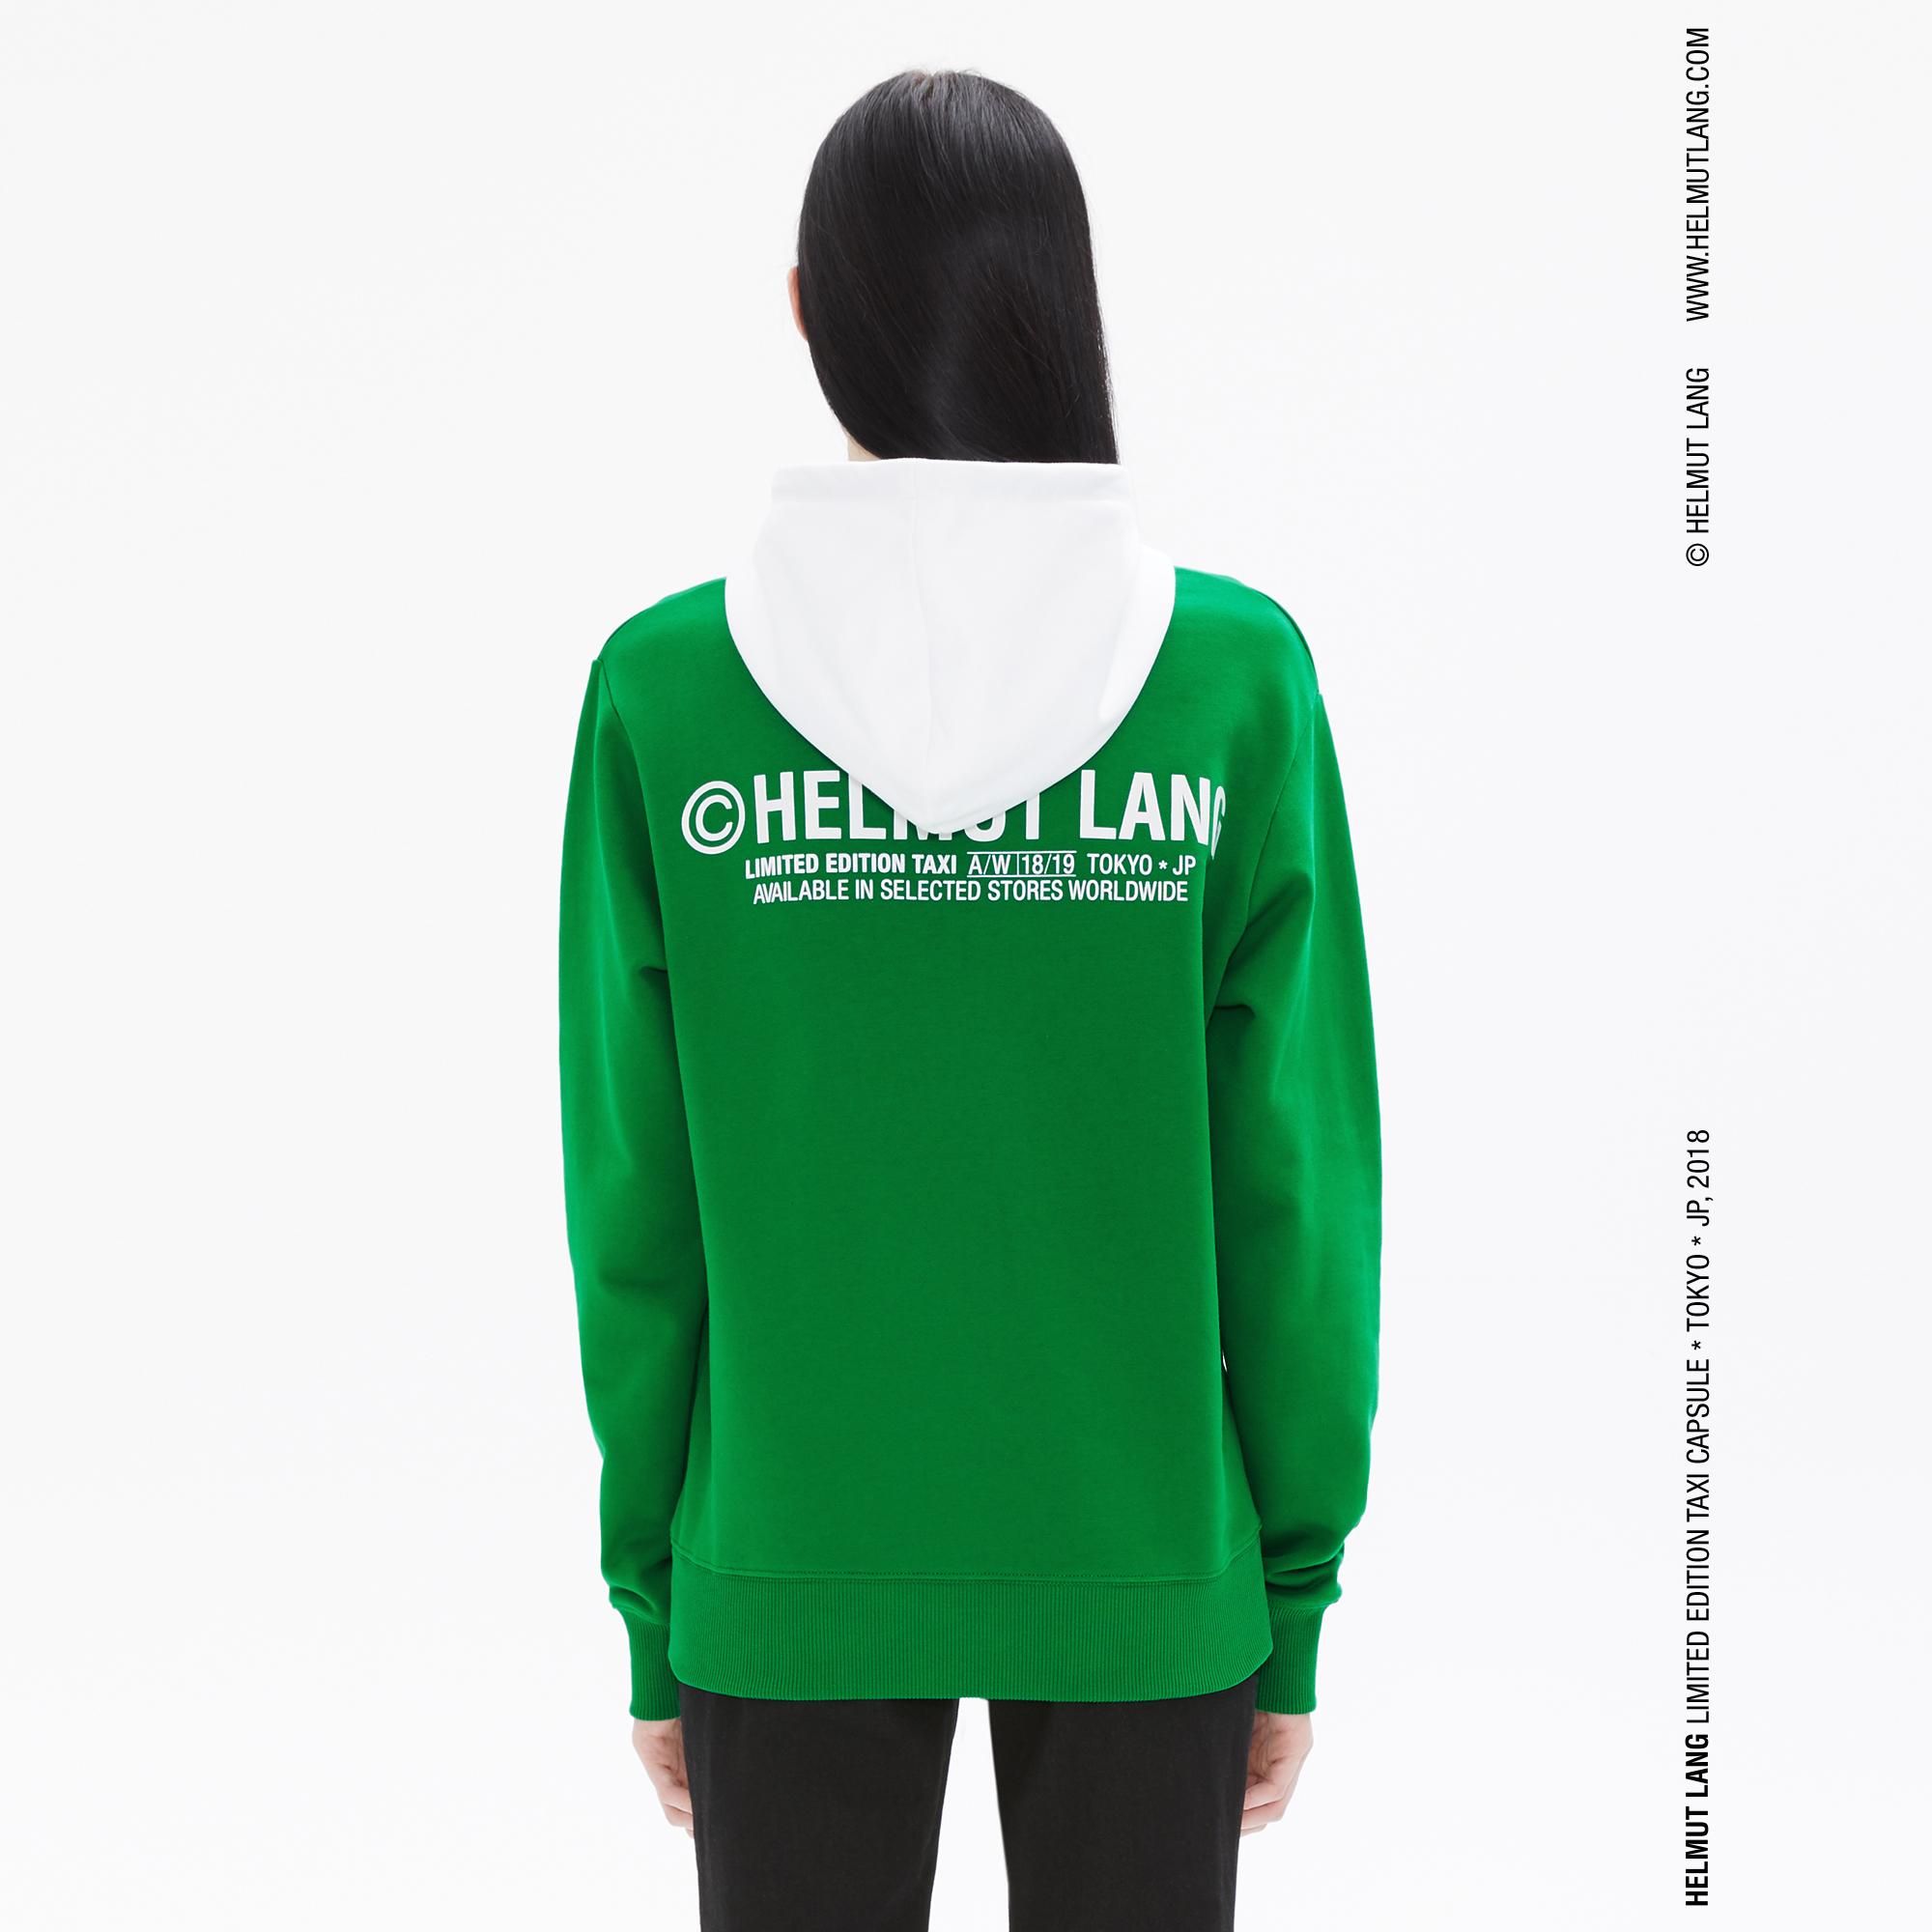 green taxi hoodie